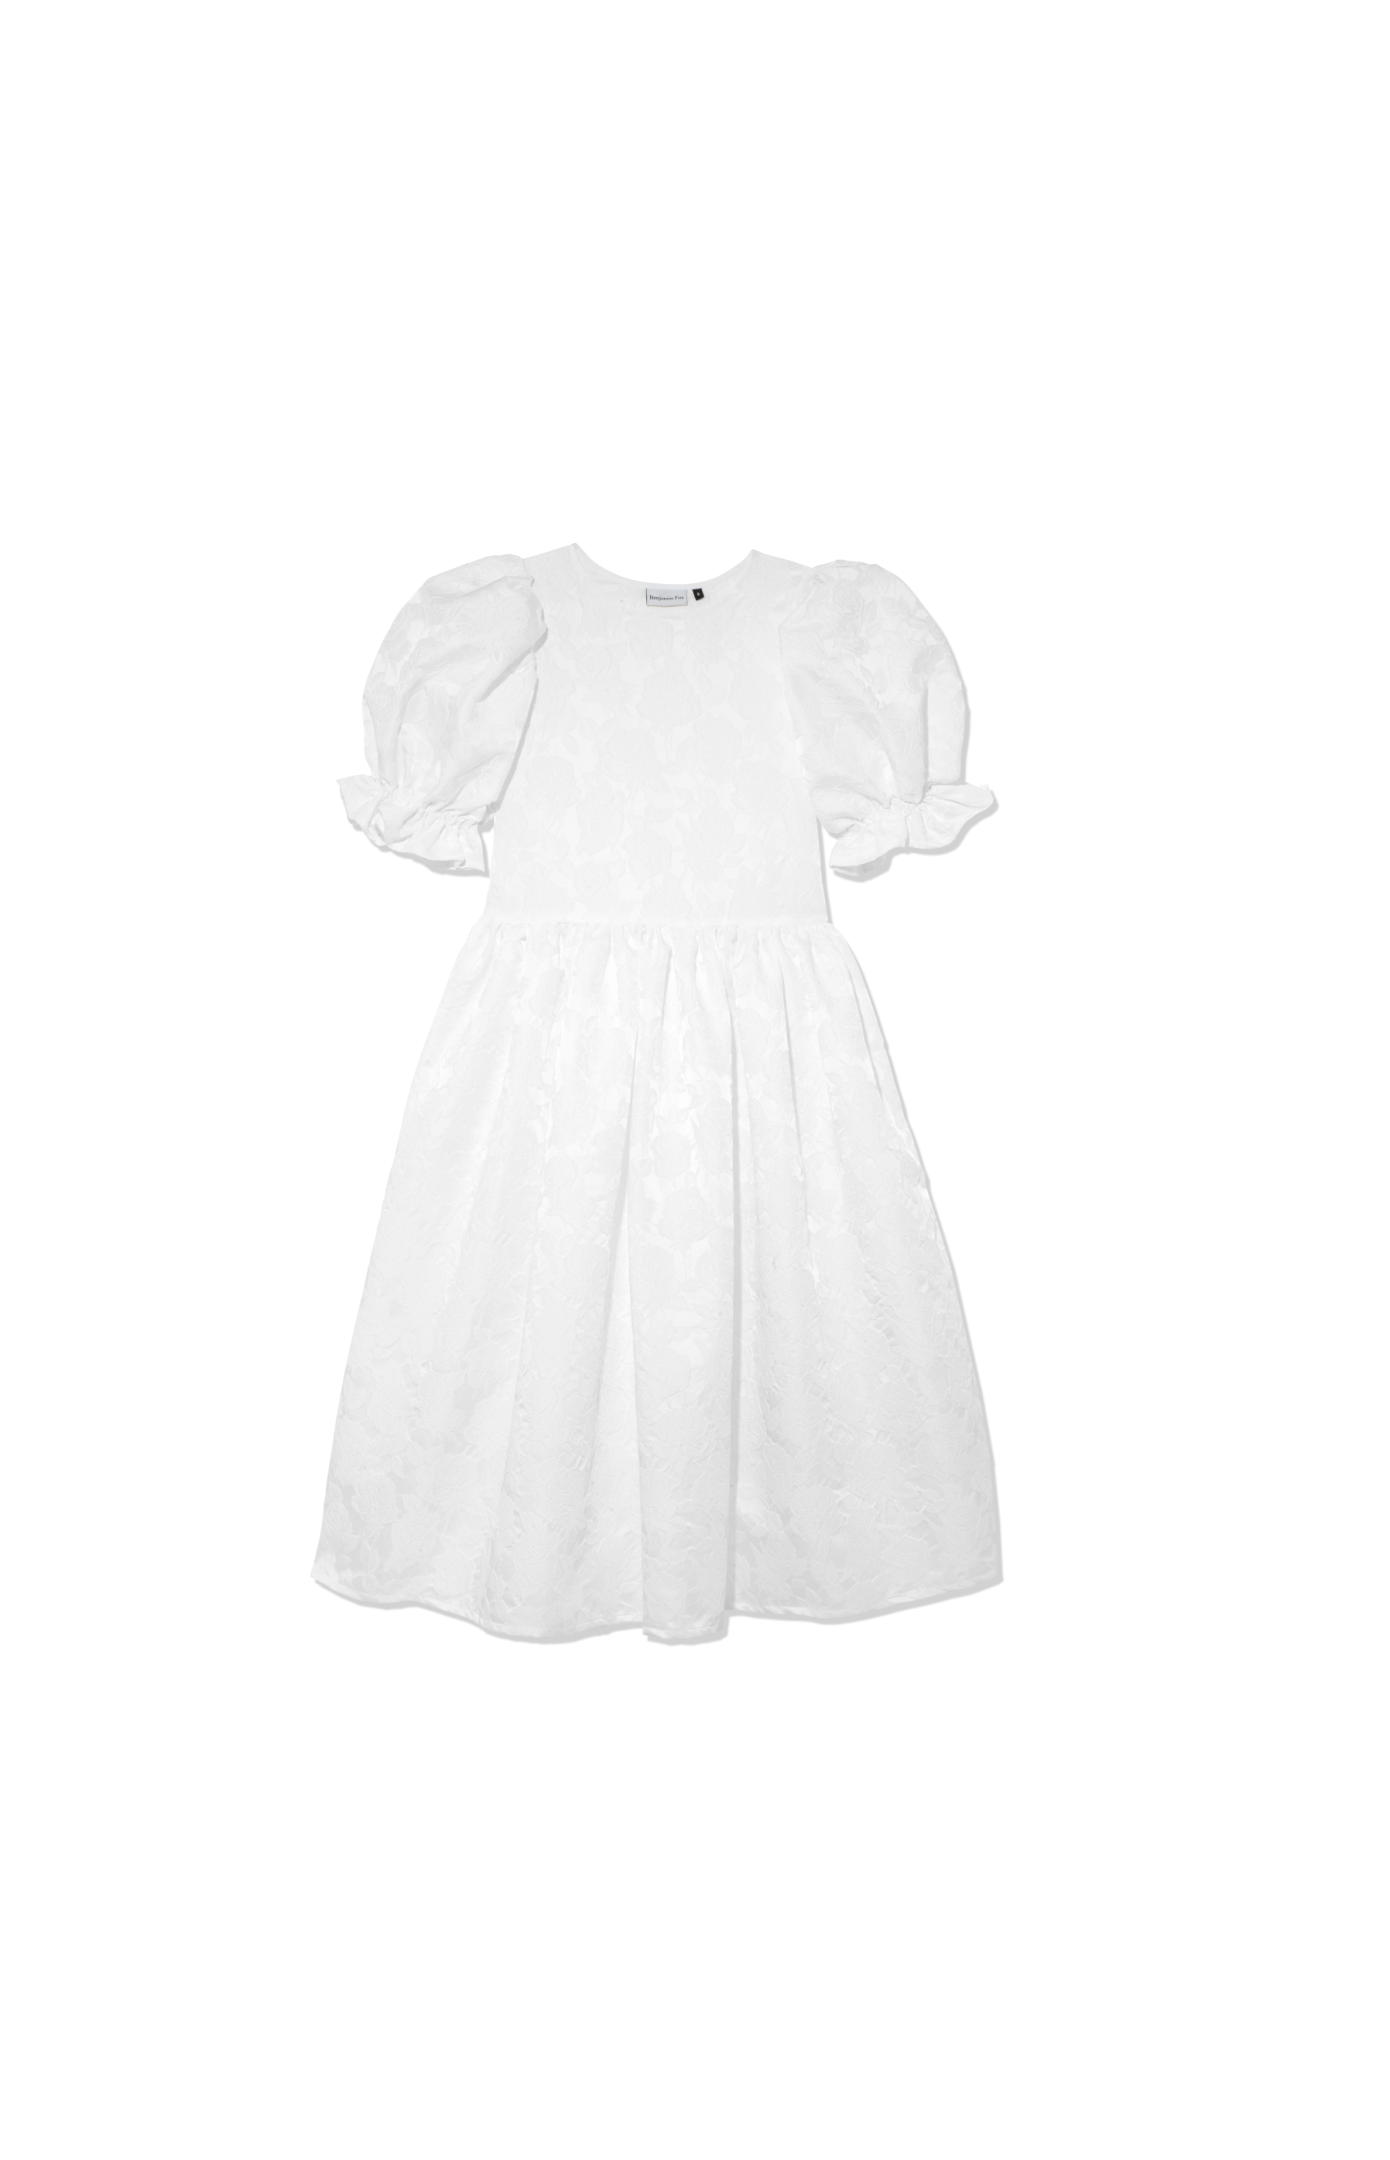 Flat lay image of white puff sleeve tiered skirt dress